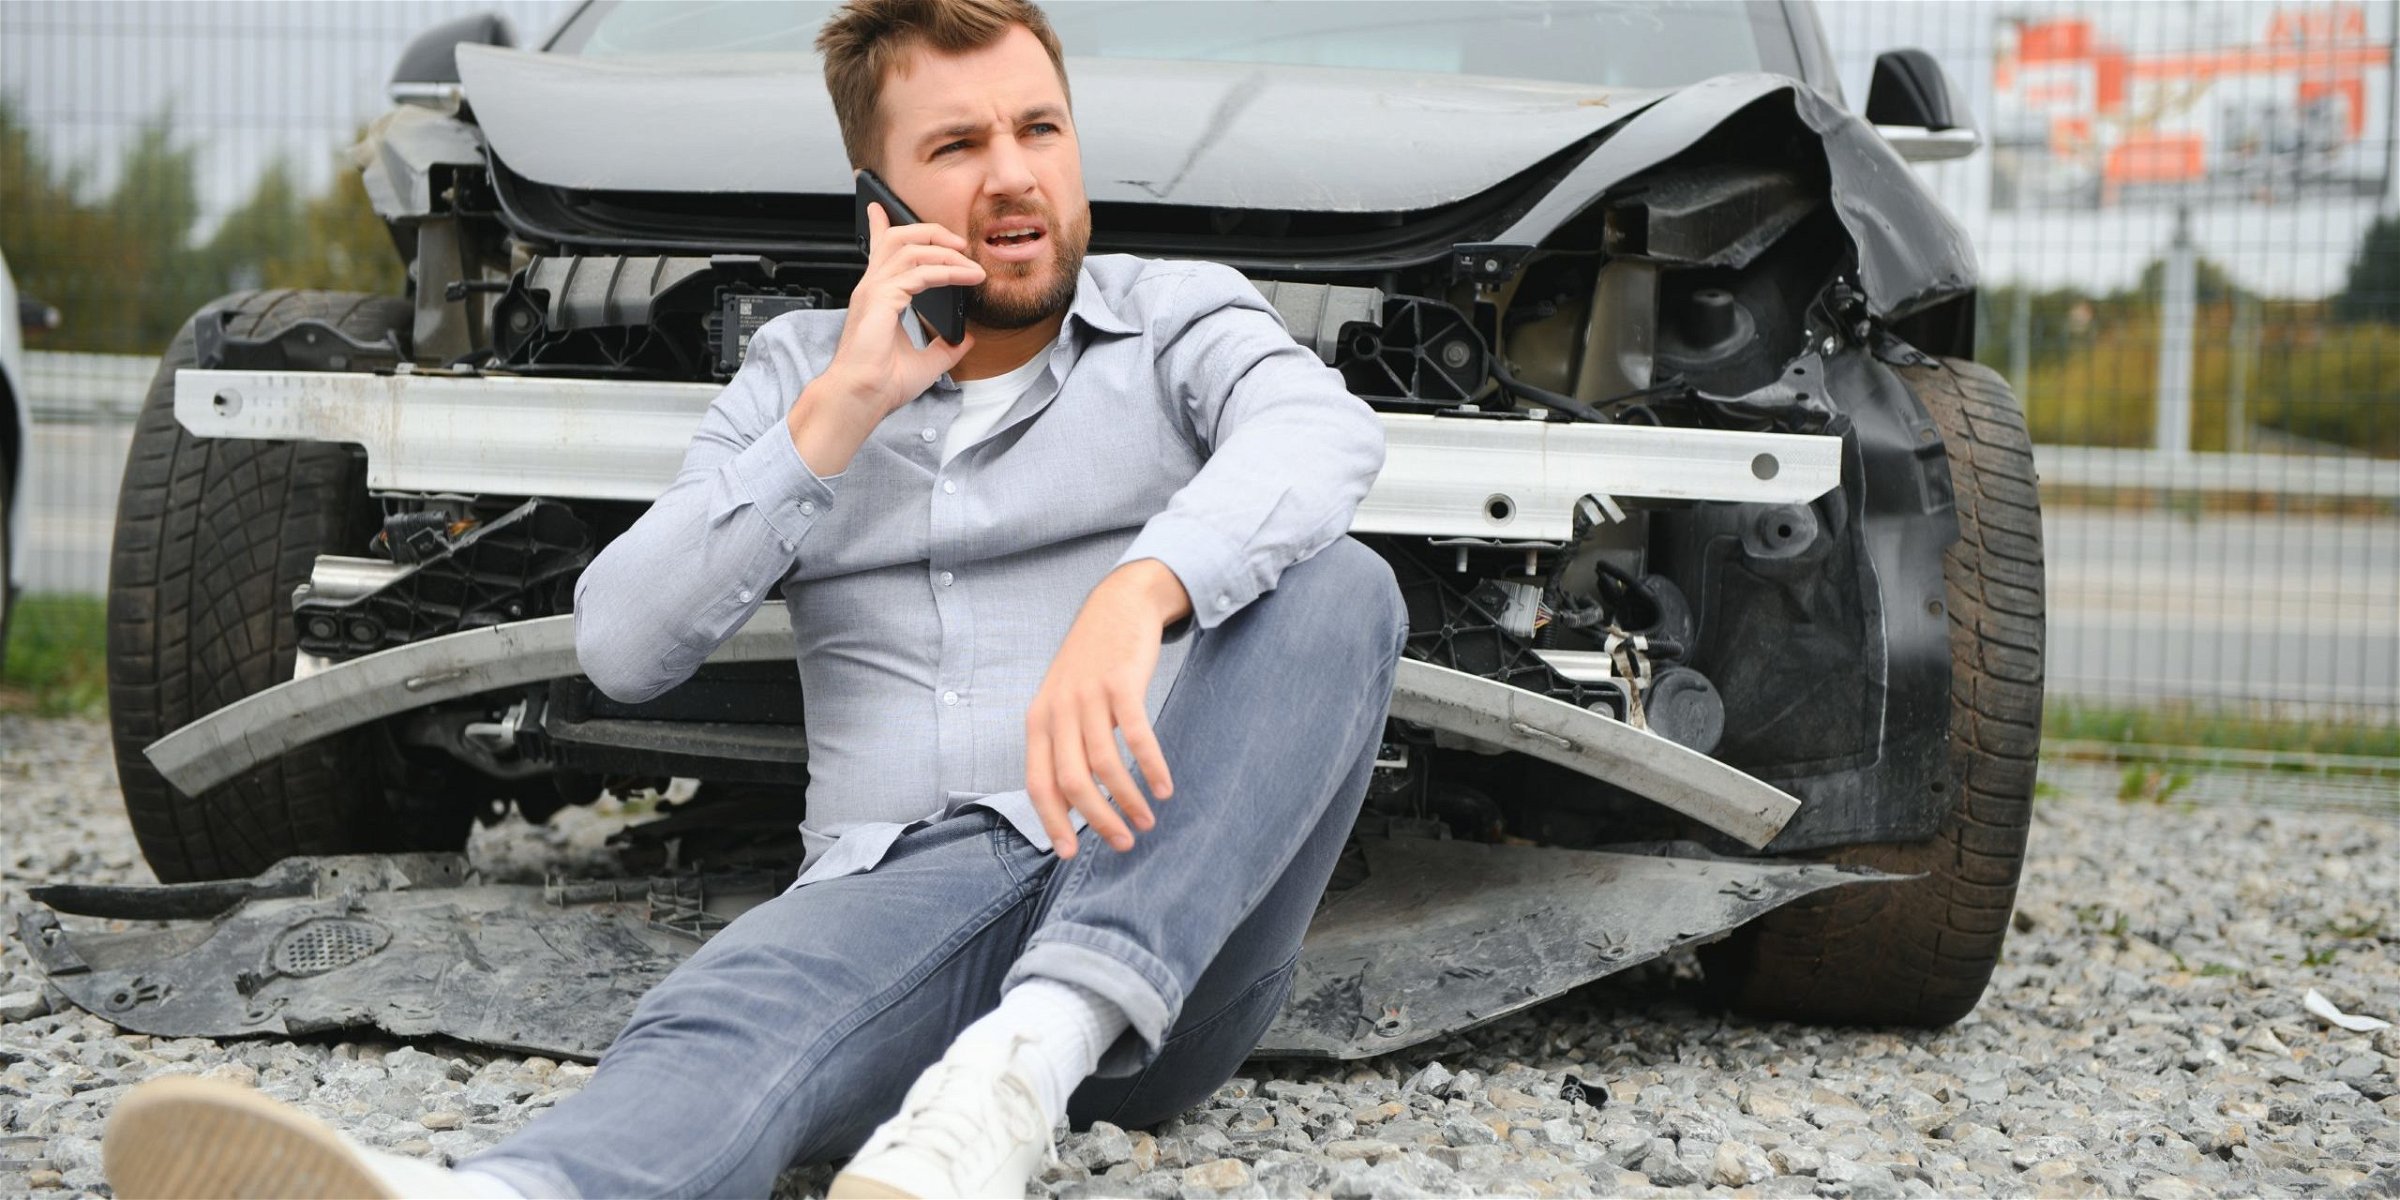 Car Accident Insurance Company Tactics to Avoid Paying